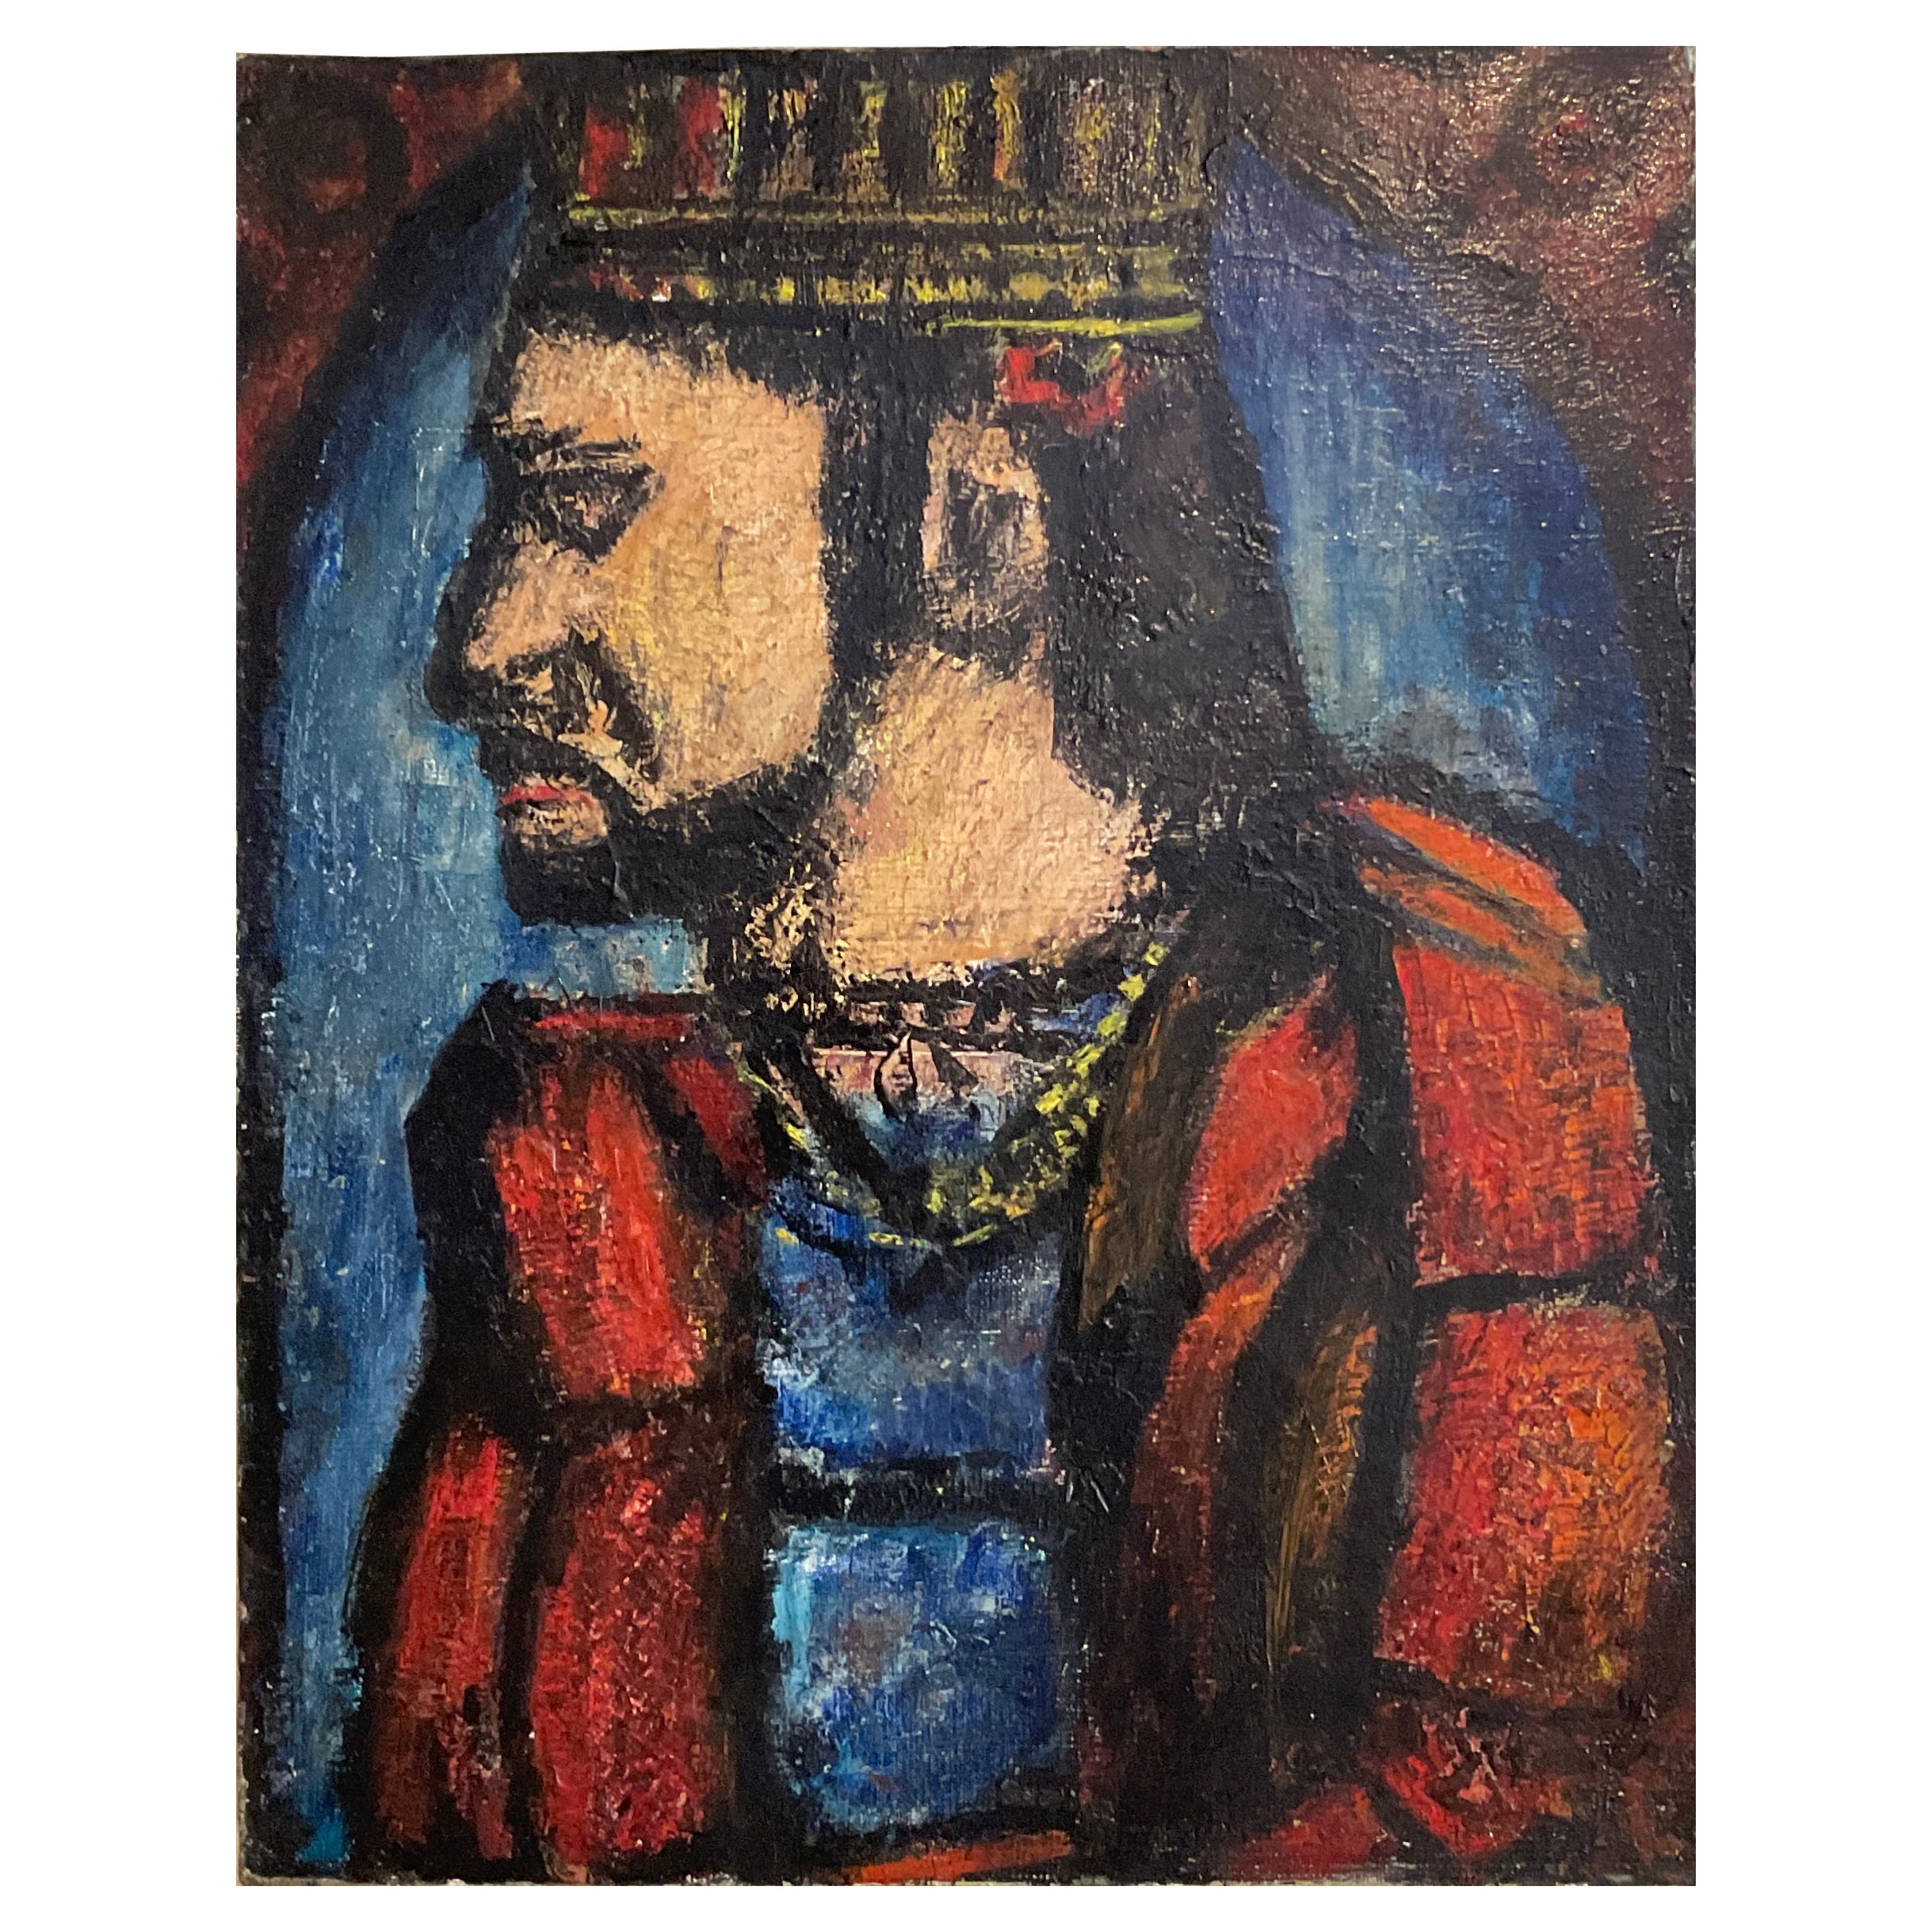 'after' Georges Rouault "Le Vieux Roi or the Old King" Oil on Canvas Painting For Sale